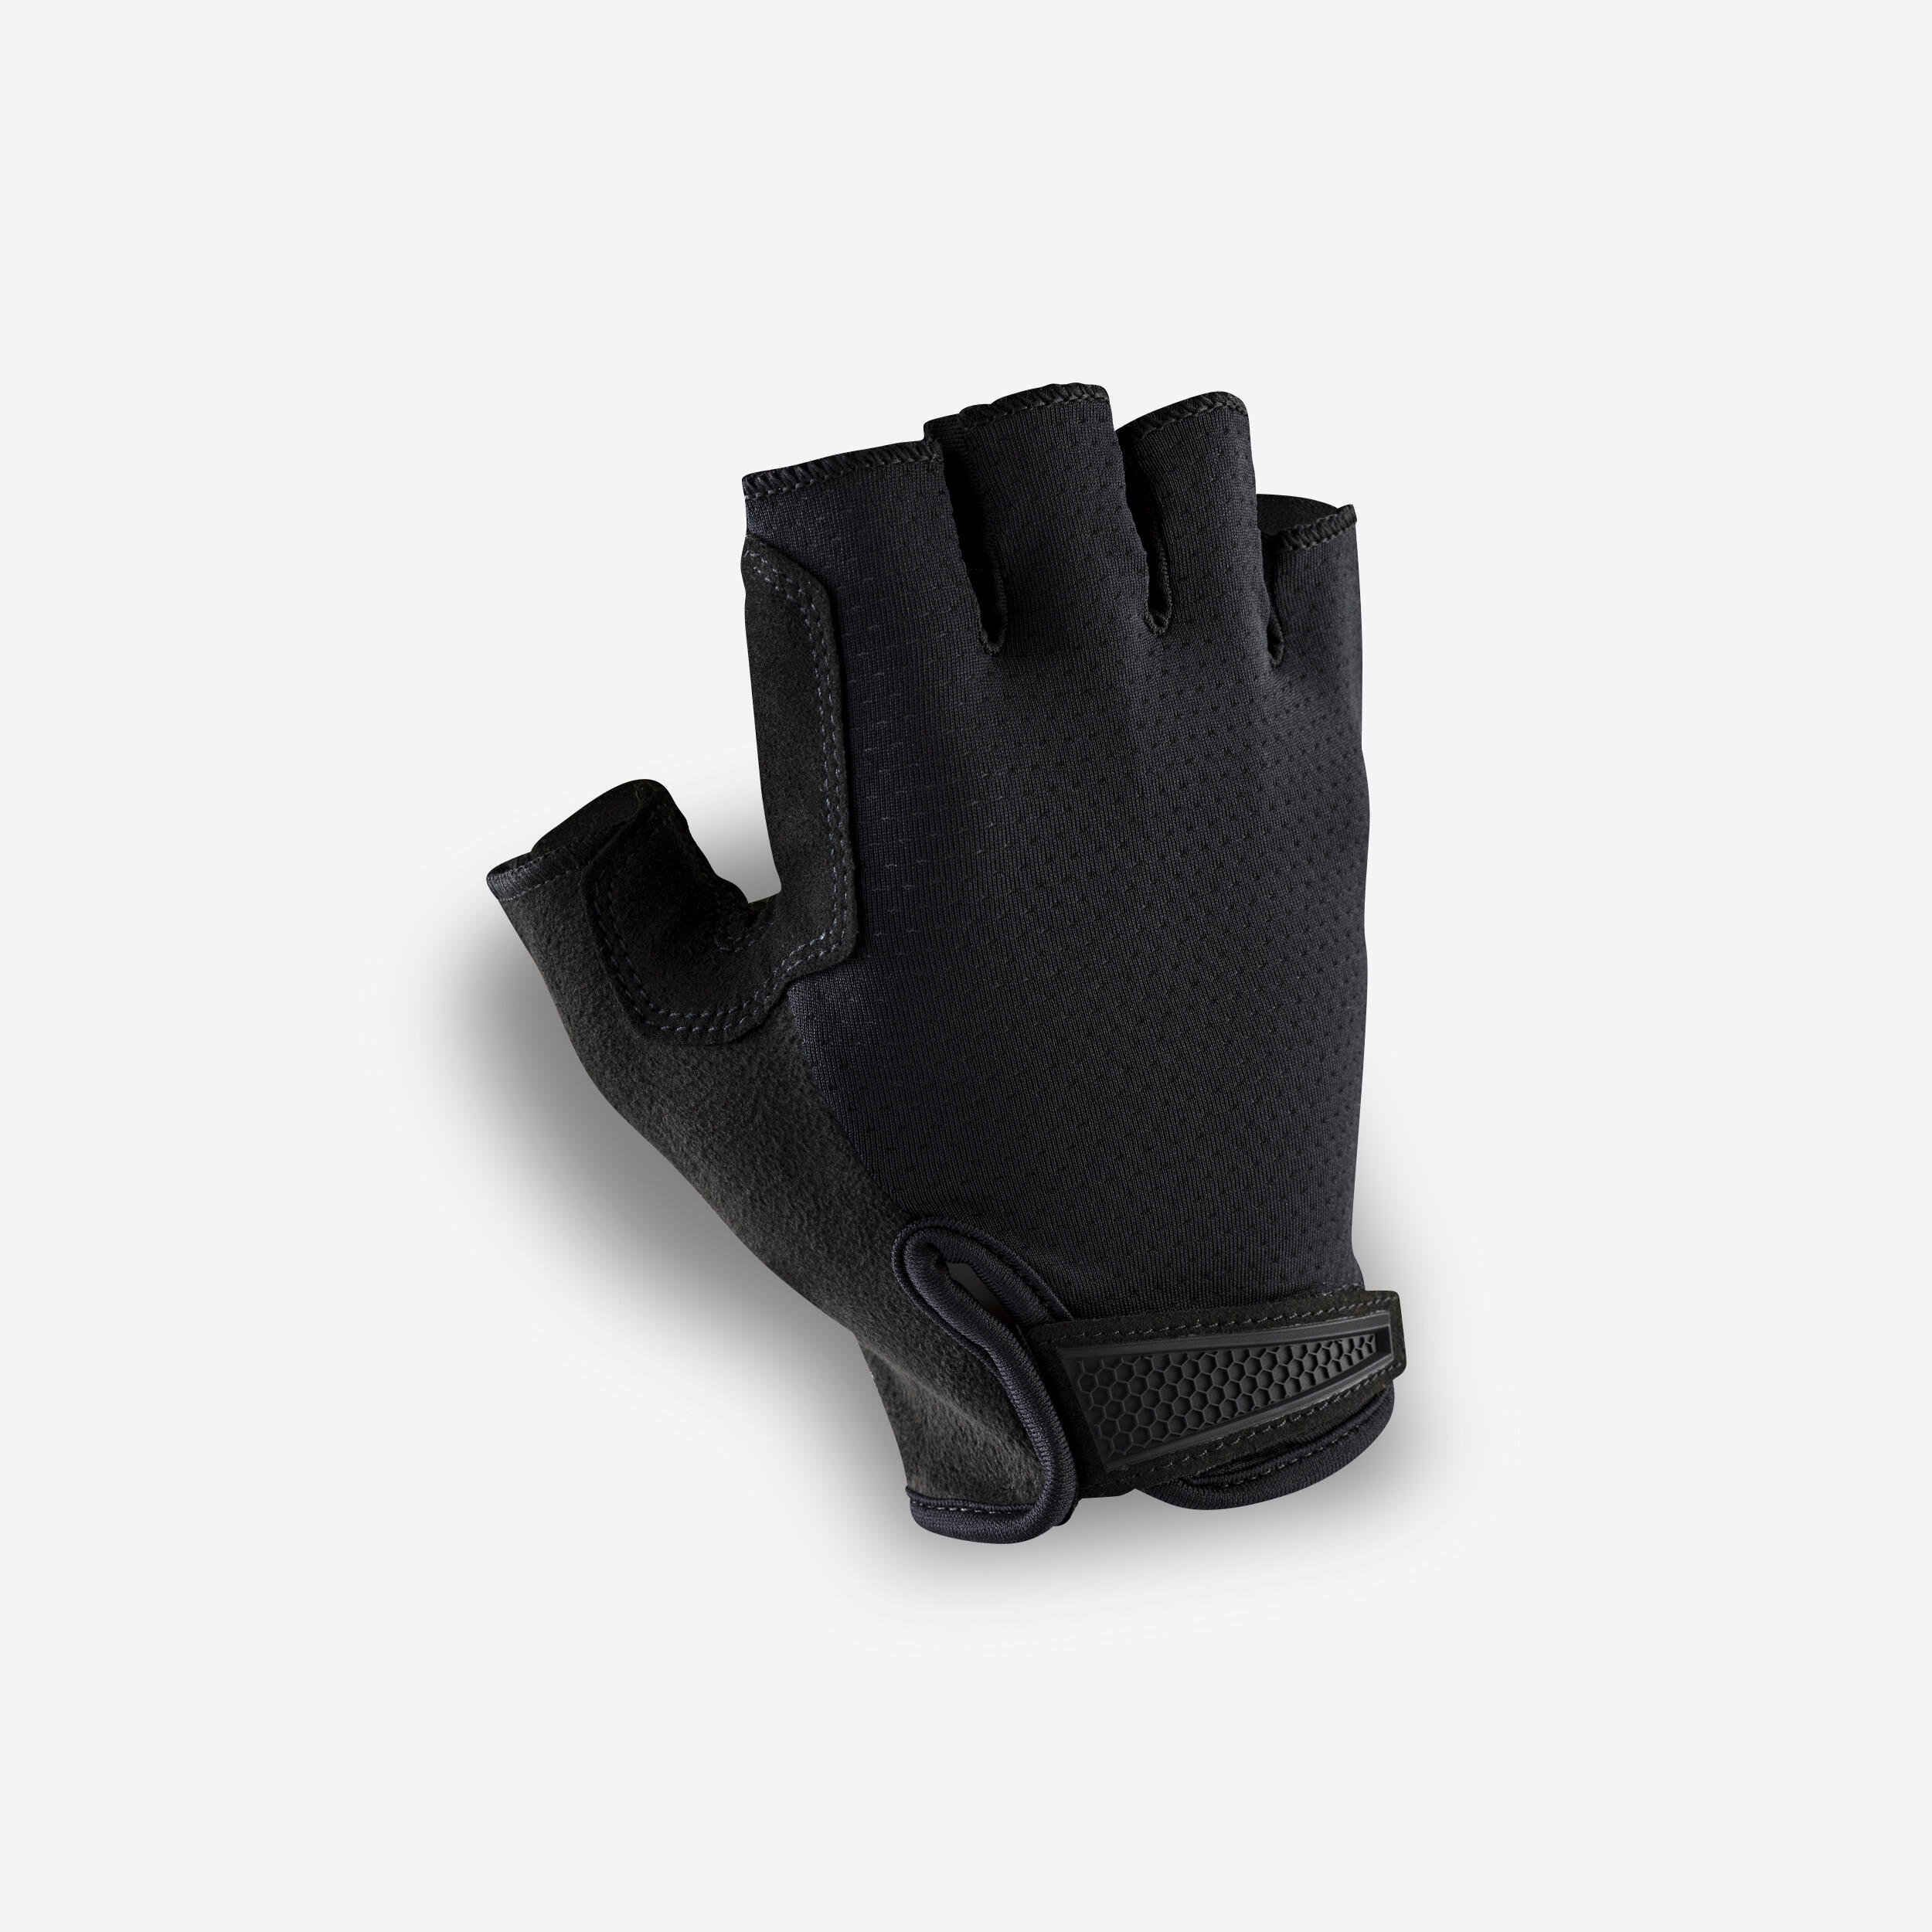 RoadCycling 900 Road Cycling Gloves - Black 1/11